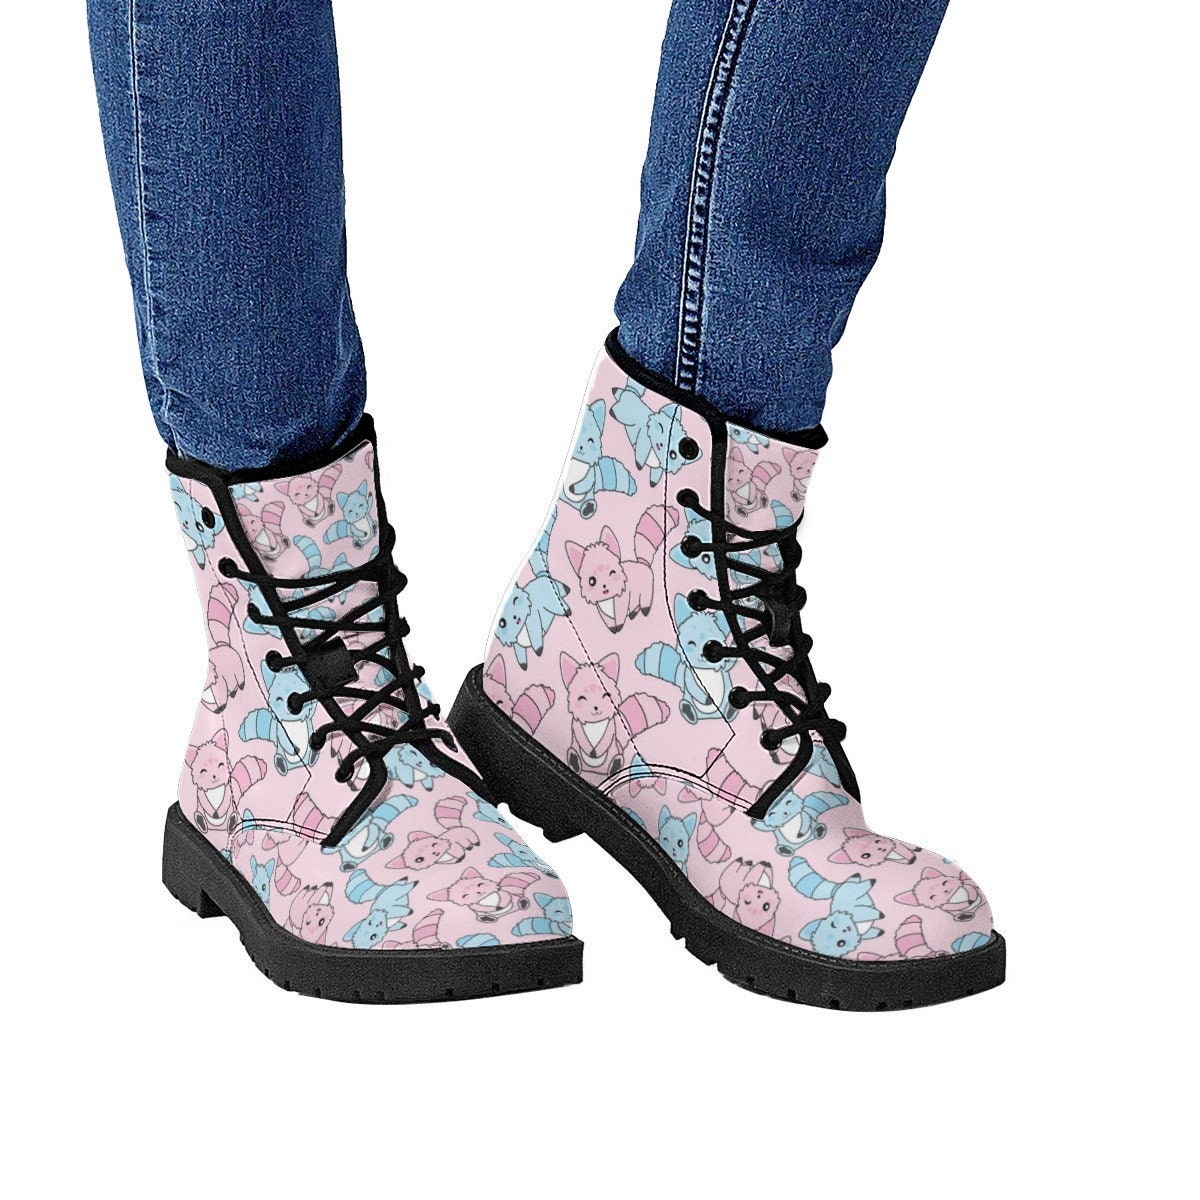 Cute Cat Boots, Pink And Blue Cats Leather Boots, Handcrafted Boots, Streetwear, Women Girl Gift, Classic Boot, Footwear